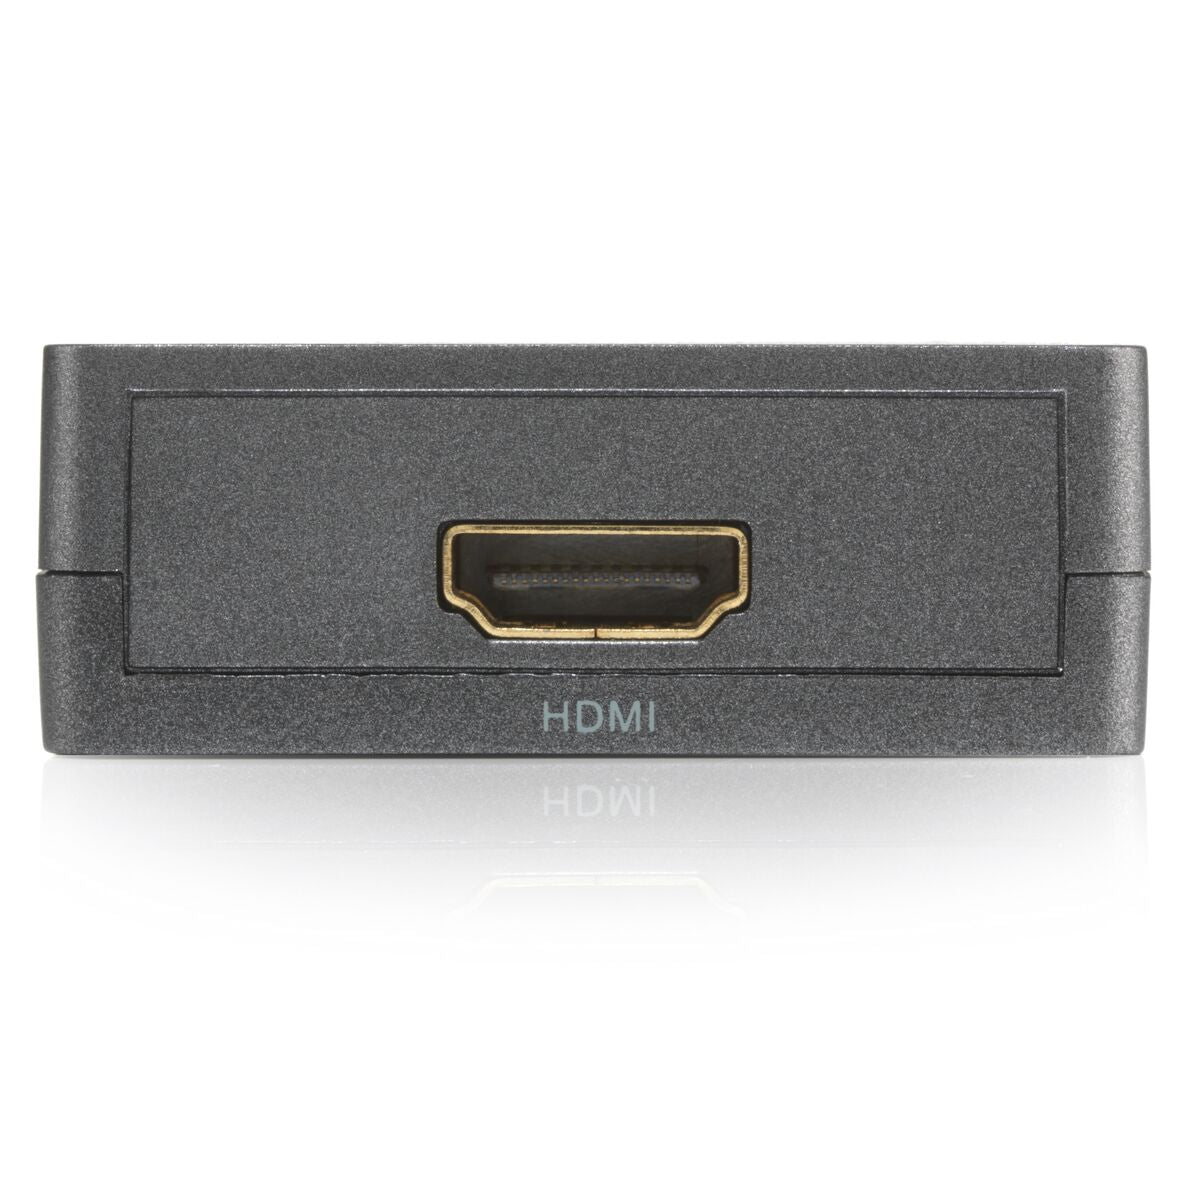 Connect HA13 - HDMI to SCART adapter - HDMI input connection | Mamitek